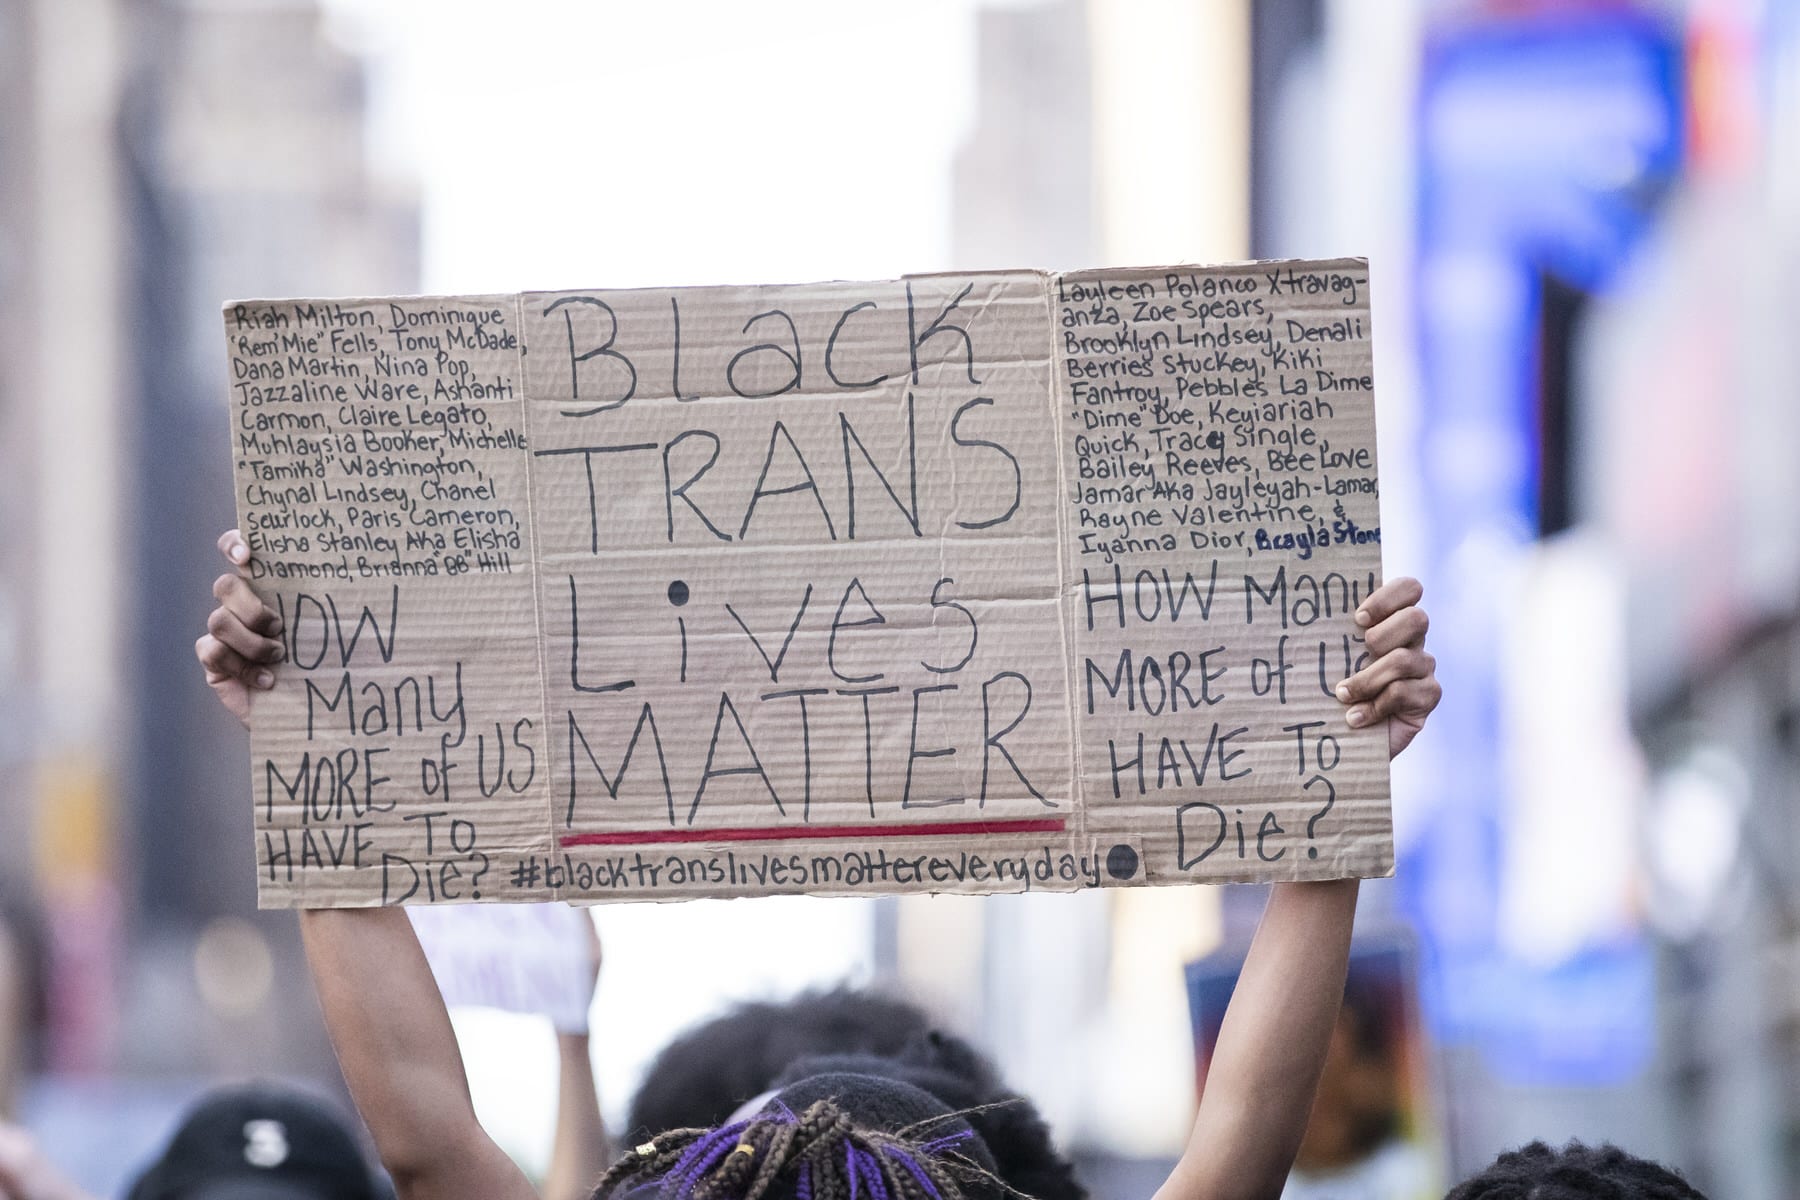 A protester holds a sign that says, "Black Trans Lives Matter".